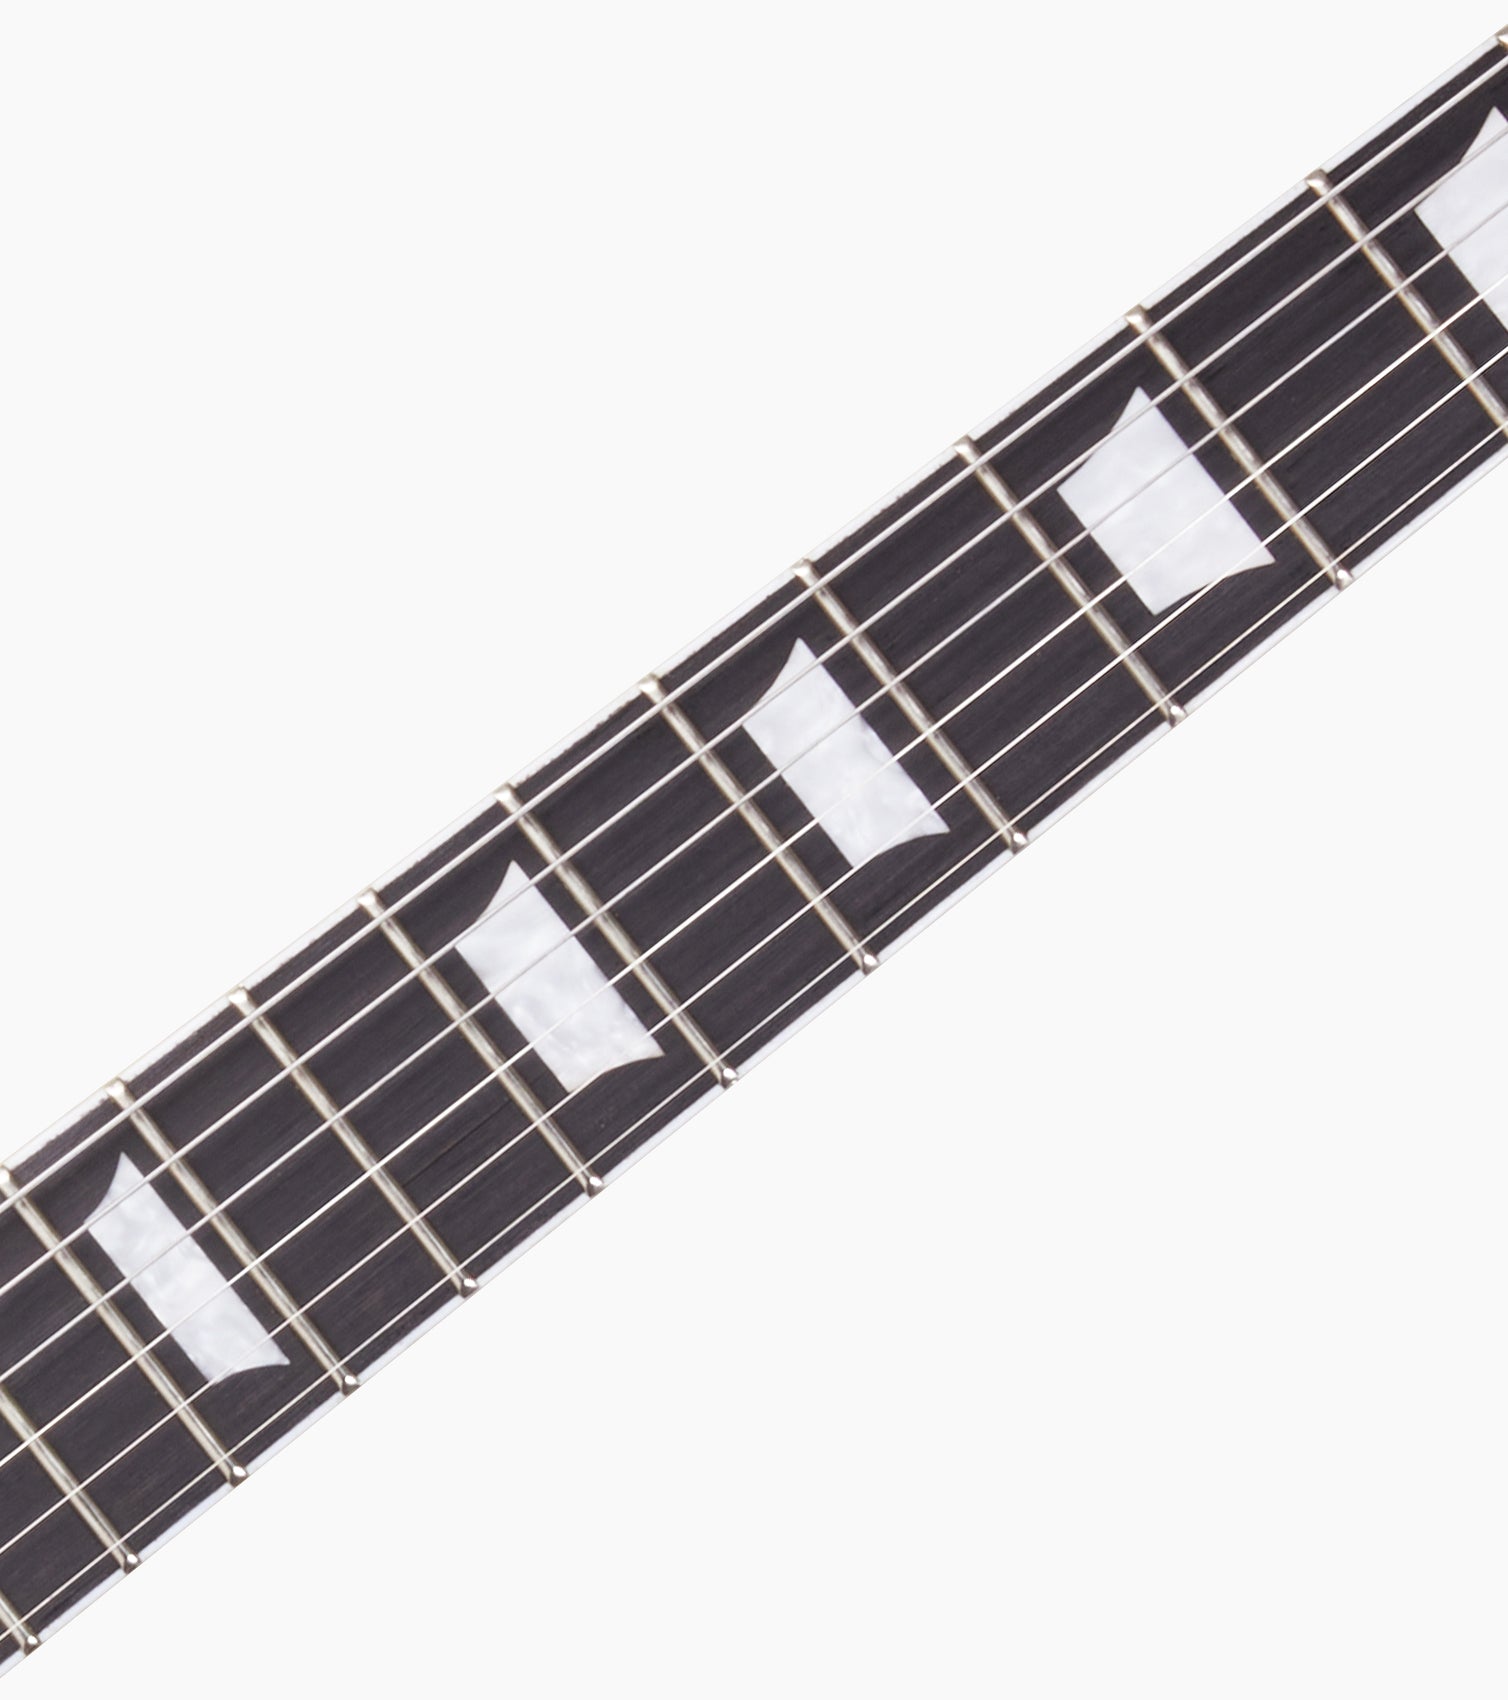 close-up of Green Left Handed les paul inspired electric guitar fretboard